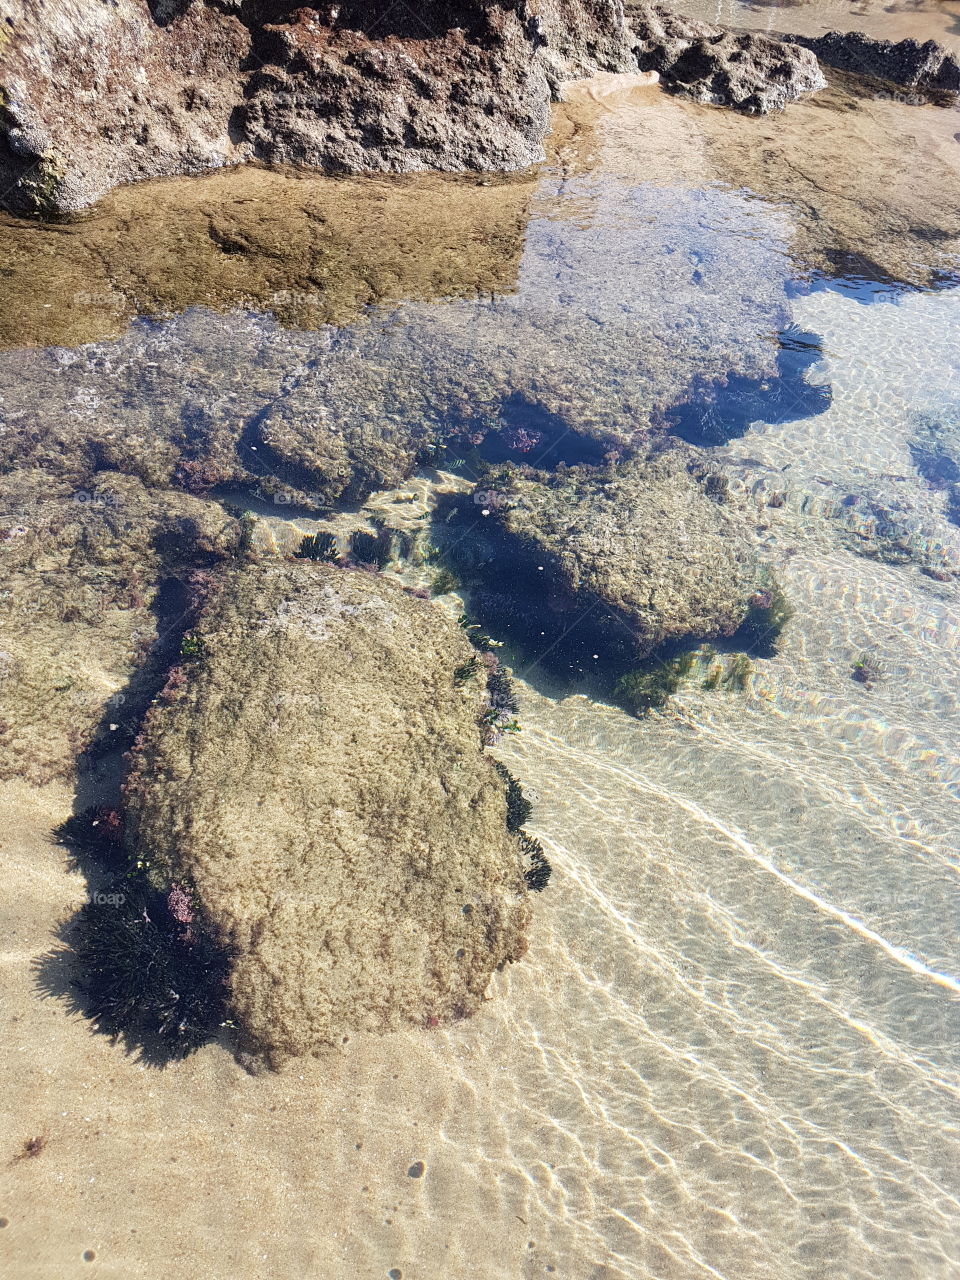 Shallow reef at the beach